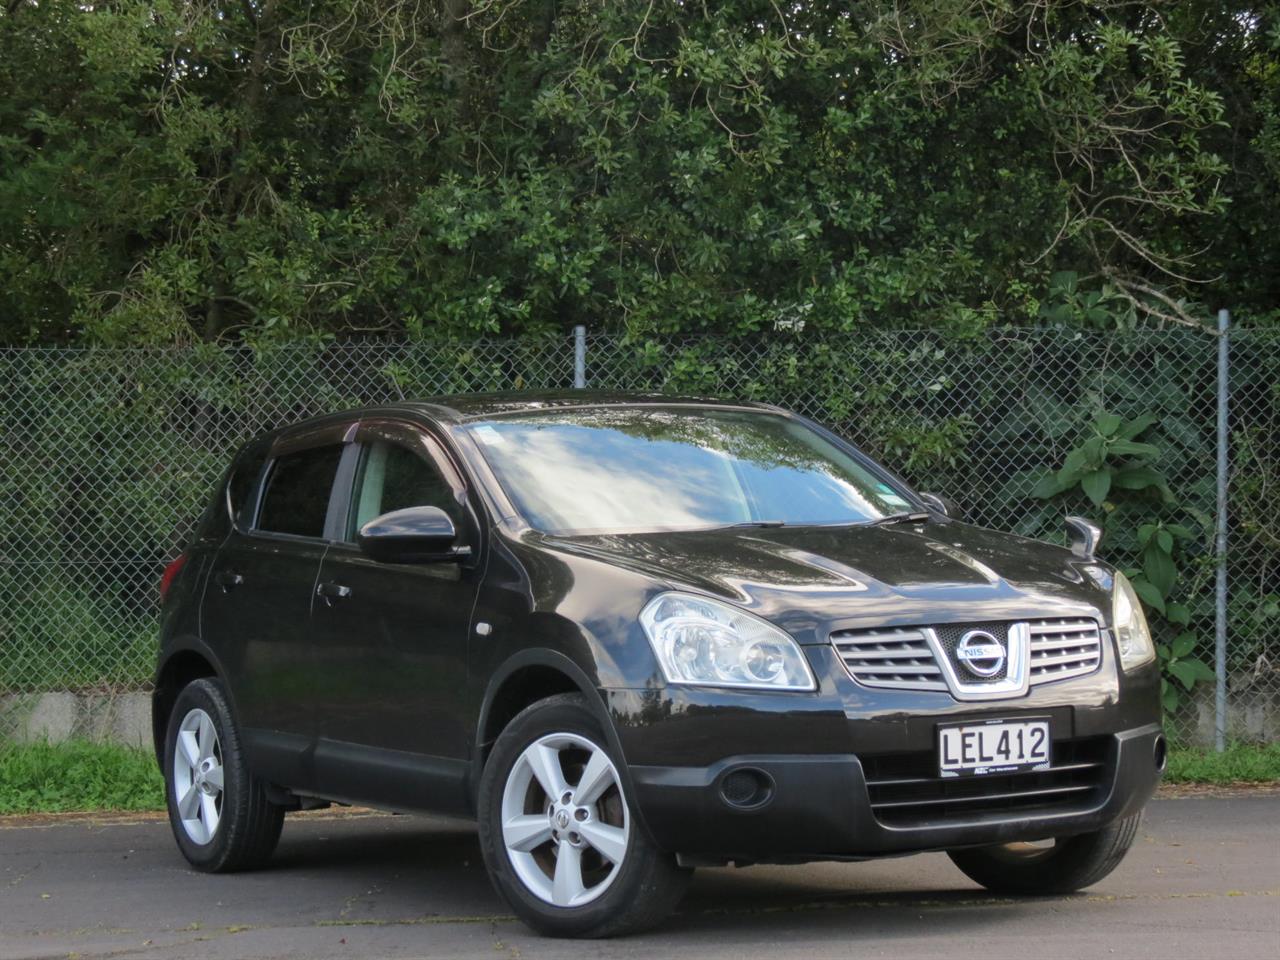 NZC 2008 Nissan DUALIS just arrived to Auckland